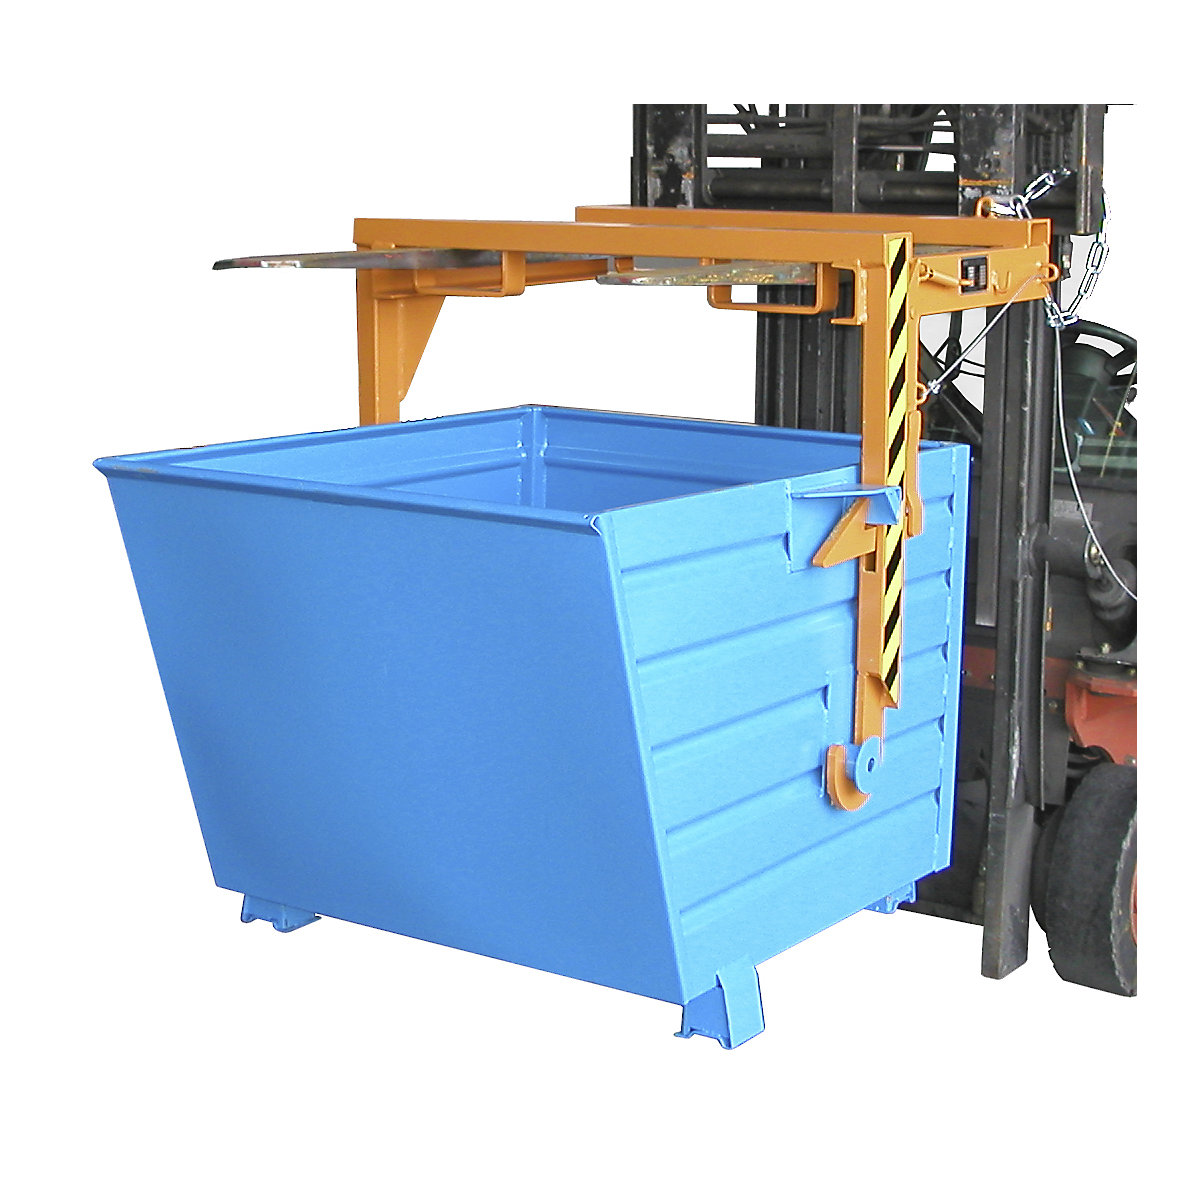 Forklift support bar for tilting skips and stacking containers – eurokraft pro